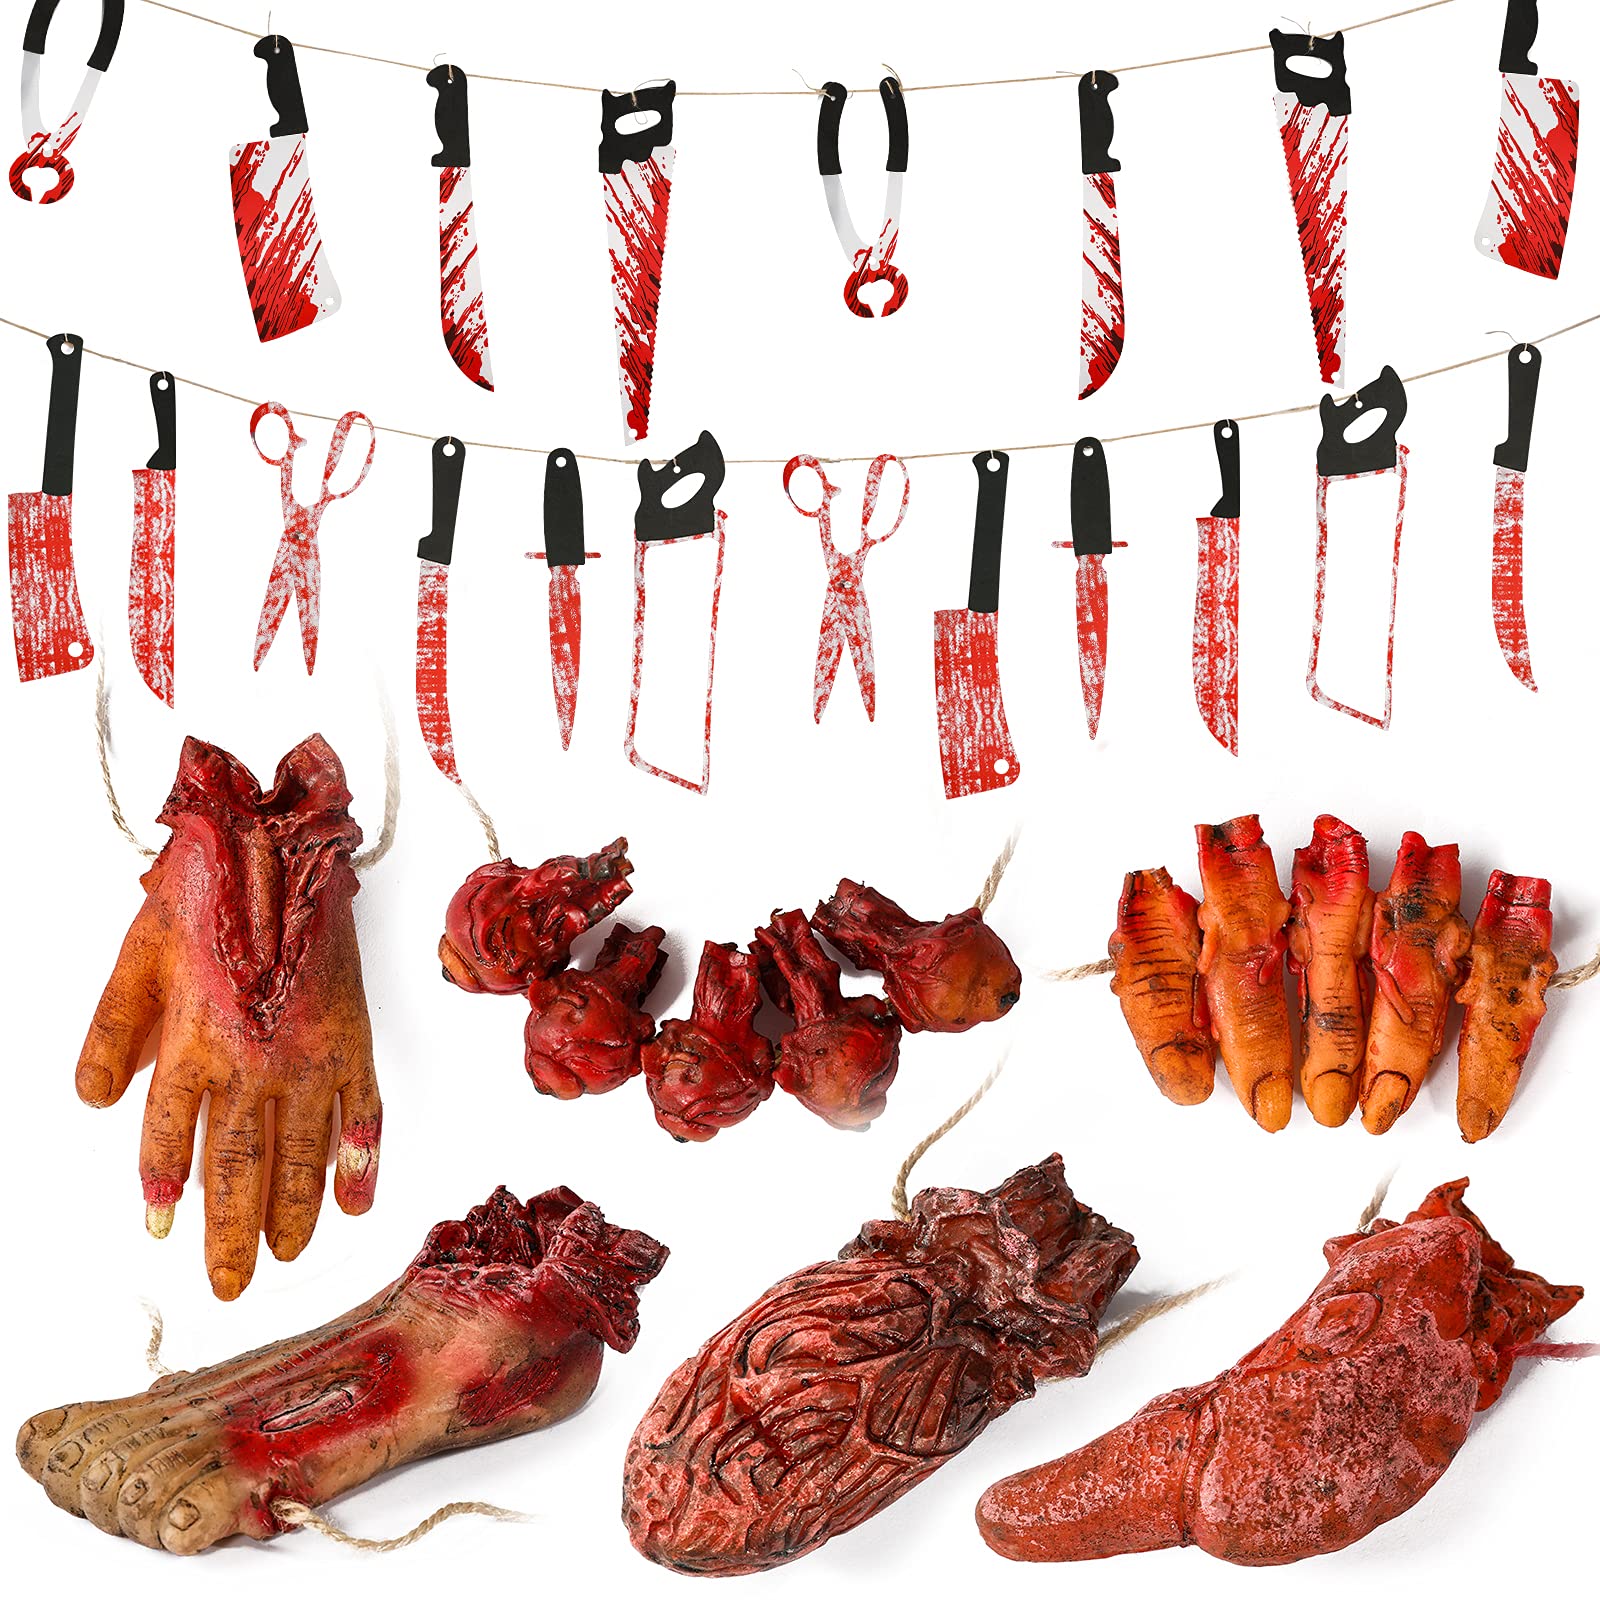 Halloween Blood Weapon Garland Banner Props Fake Scary Severed Hand Broken Body Parts for Haunted House Halloween Vampire Zombie Party Decorations Supplies (6pcs Body Parts + 20pcs Weapons)